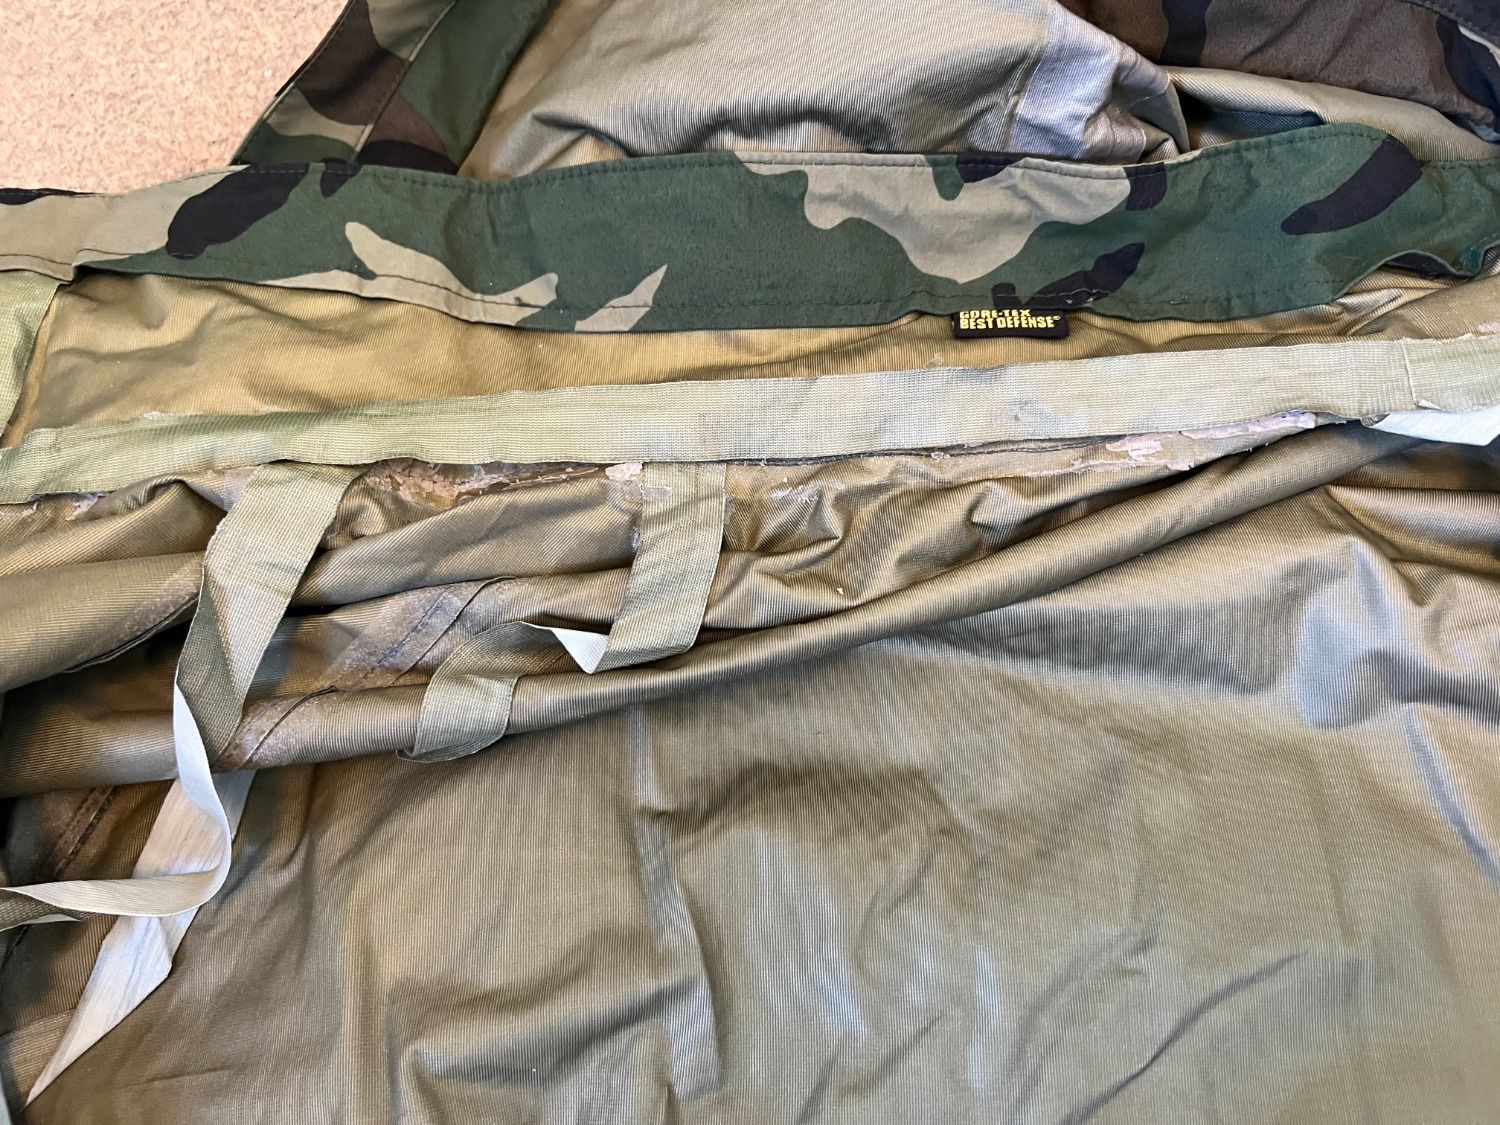 Russian army rain suit - Gear - Airsoft Forums UK